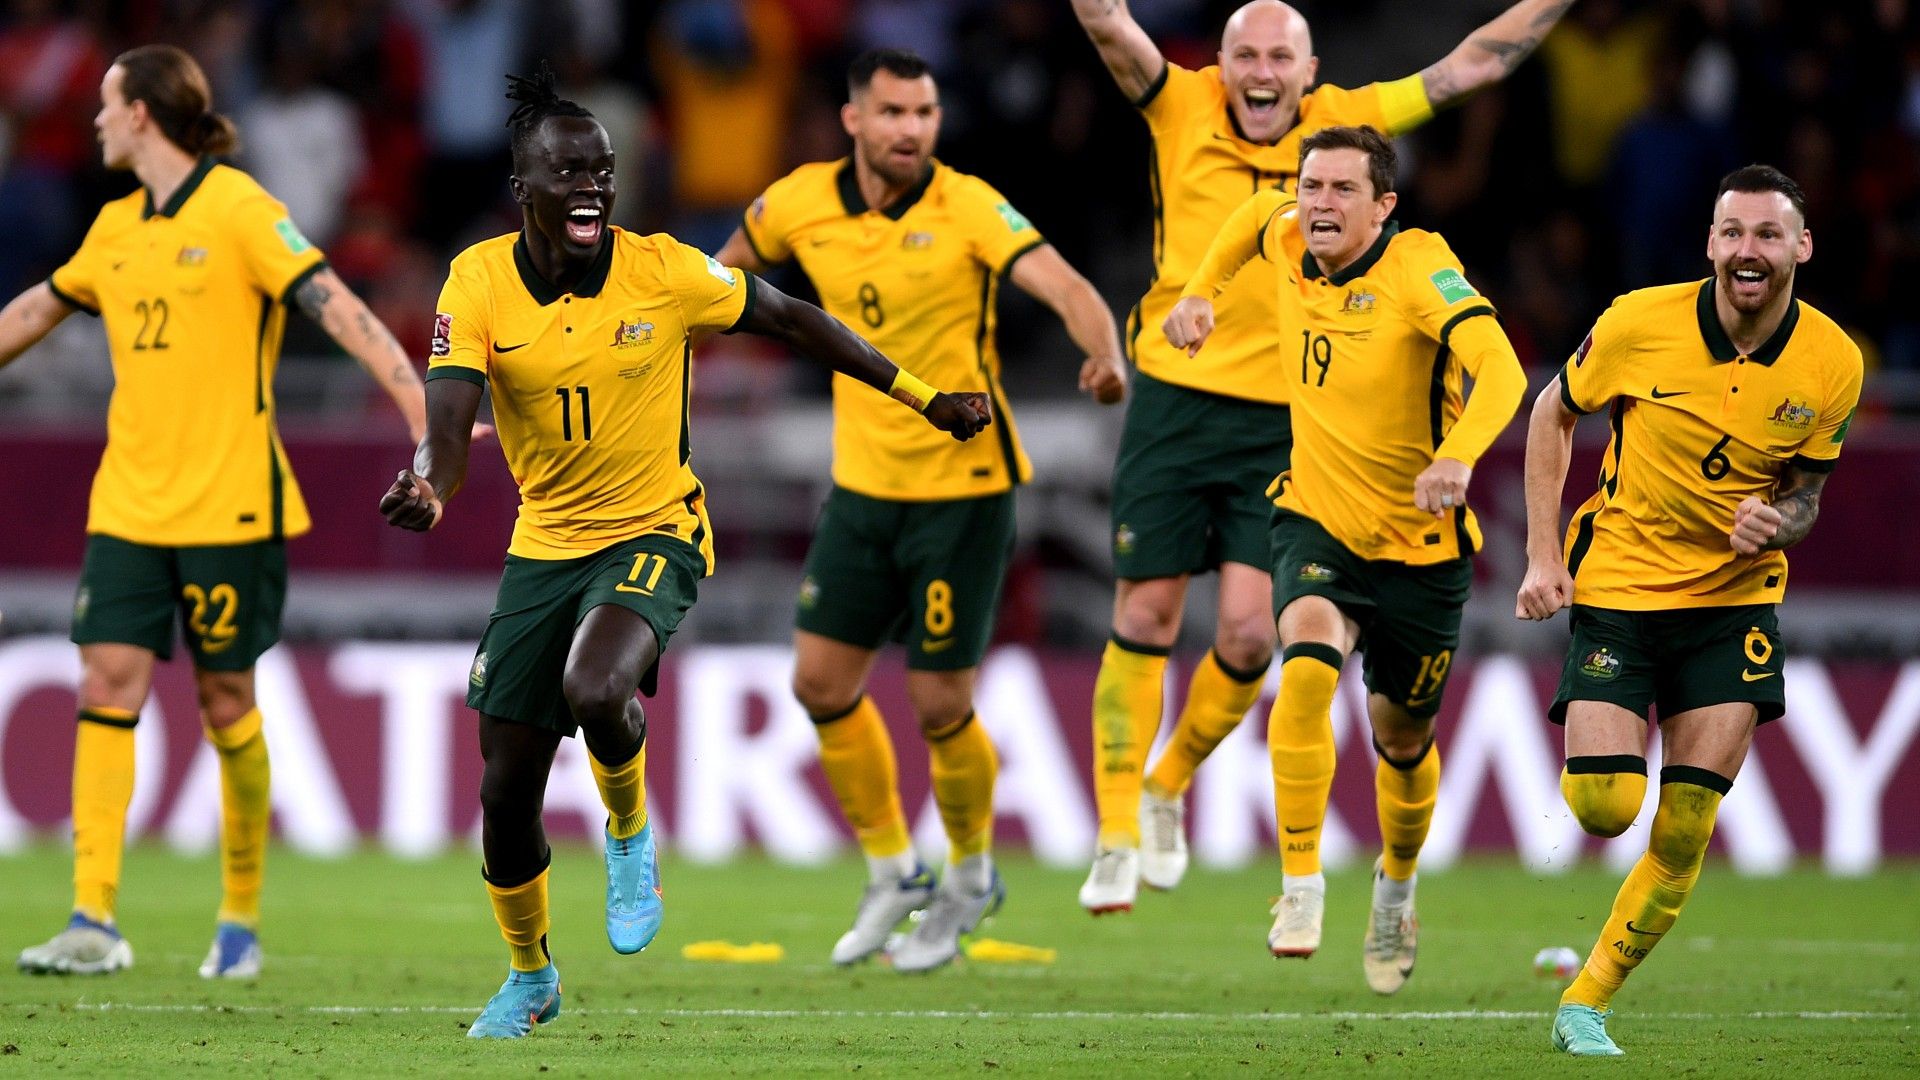 Socceroos qualify for World Cup after penalty shootout win over Peru